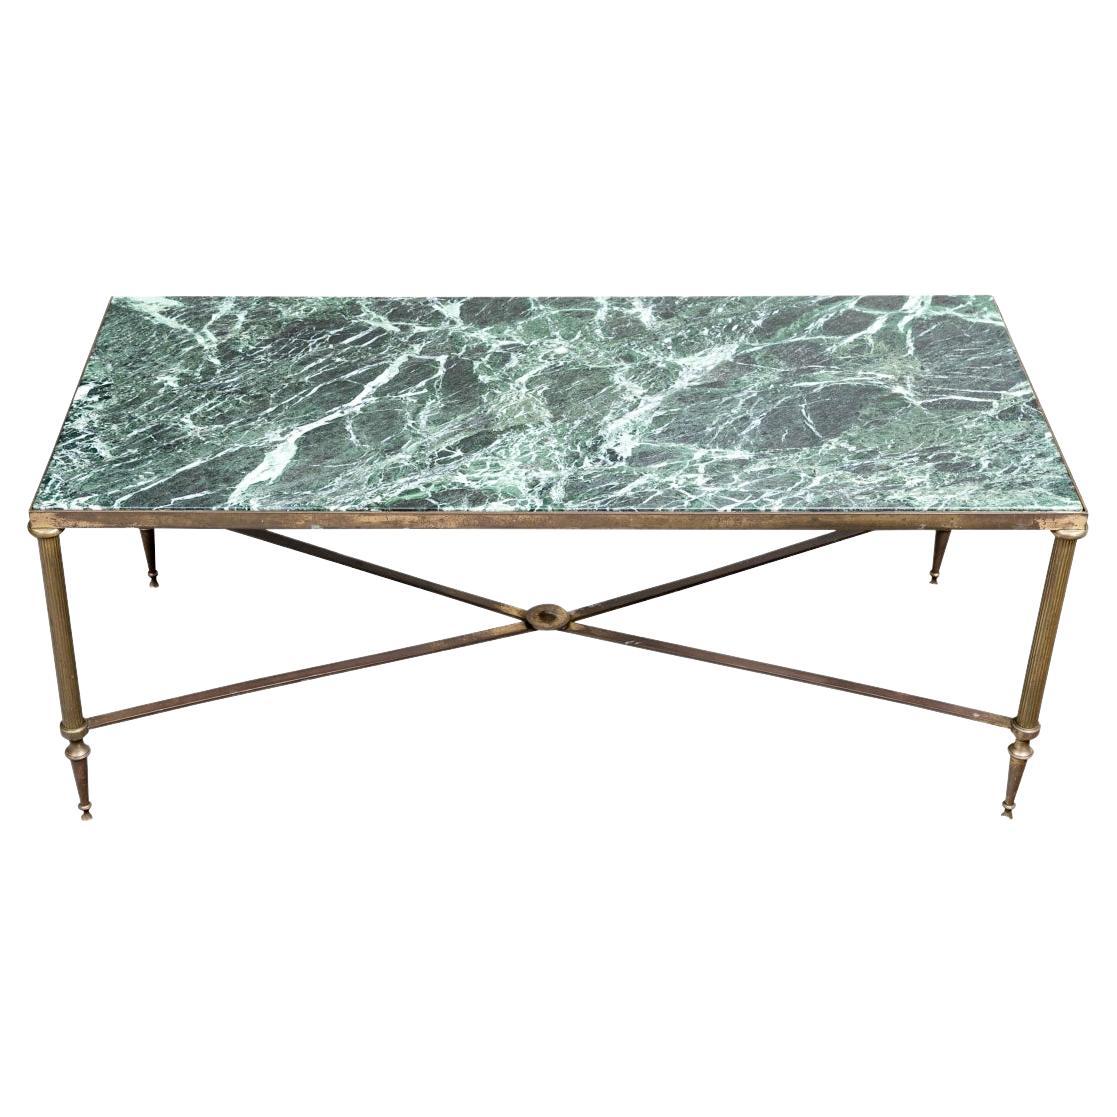 Antique French Gilt Iron Coffee Table With Verdigis  Marble Top, Circa 1920 For Sale